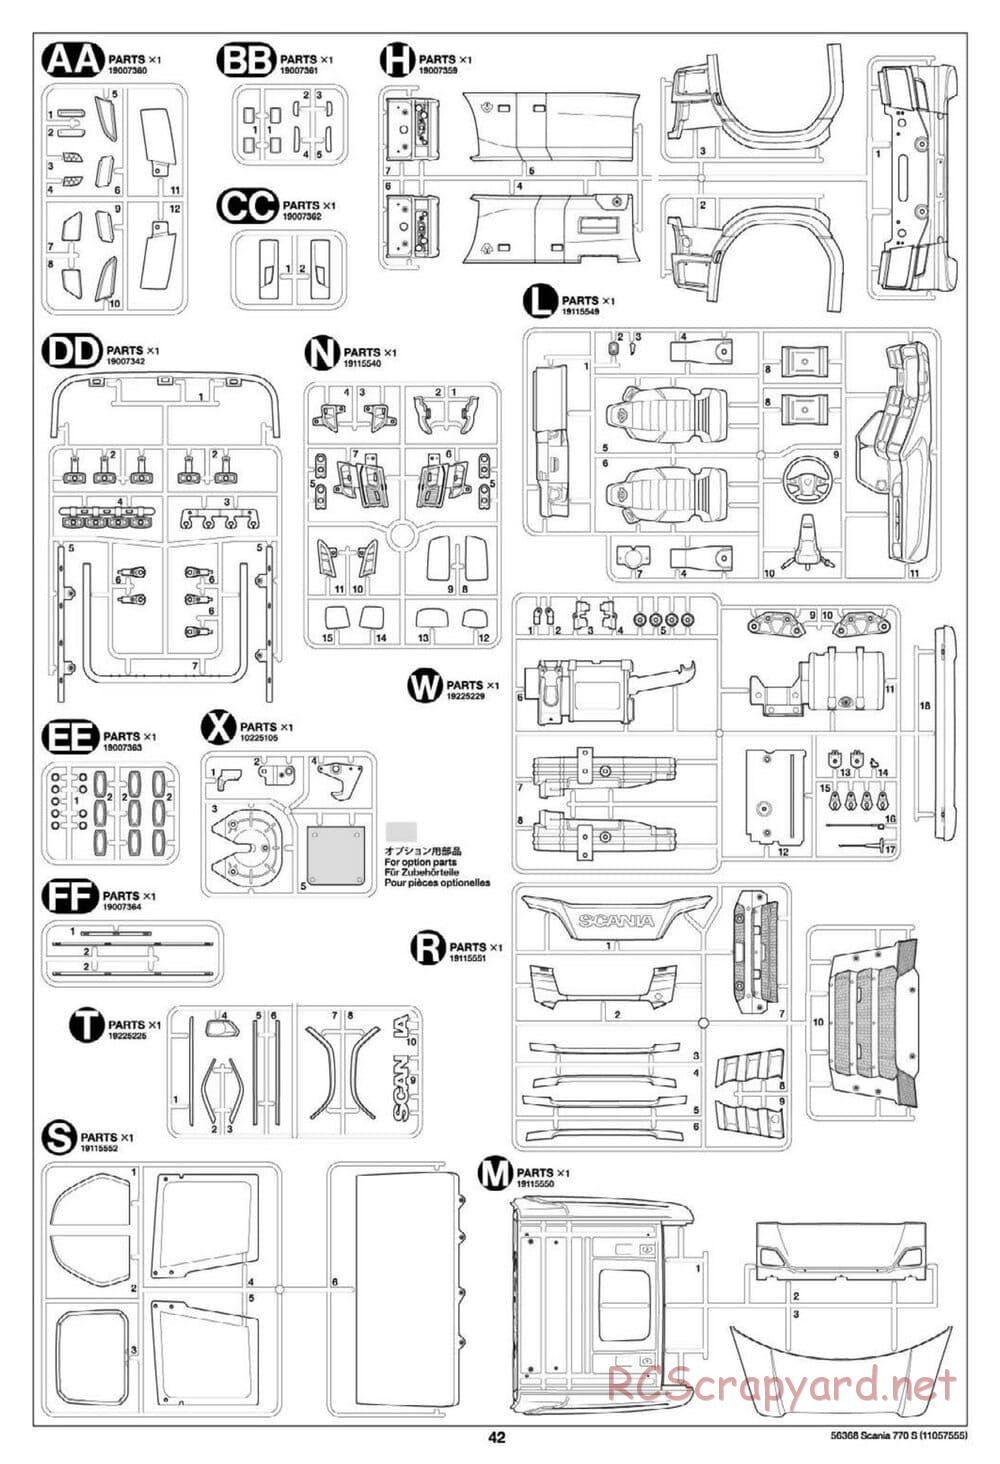 Tamiya - Scania 770S 6x4 Tractor Truck Chassis - Manual - Page 42